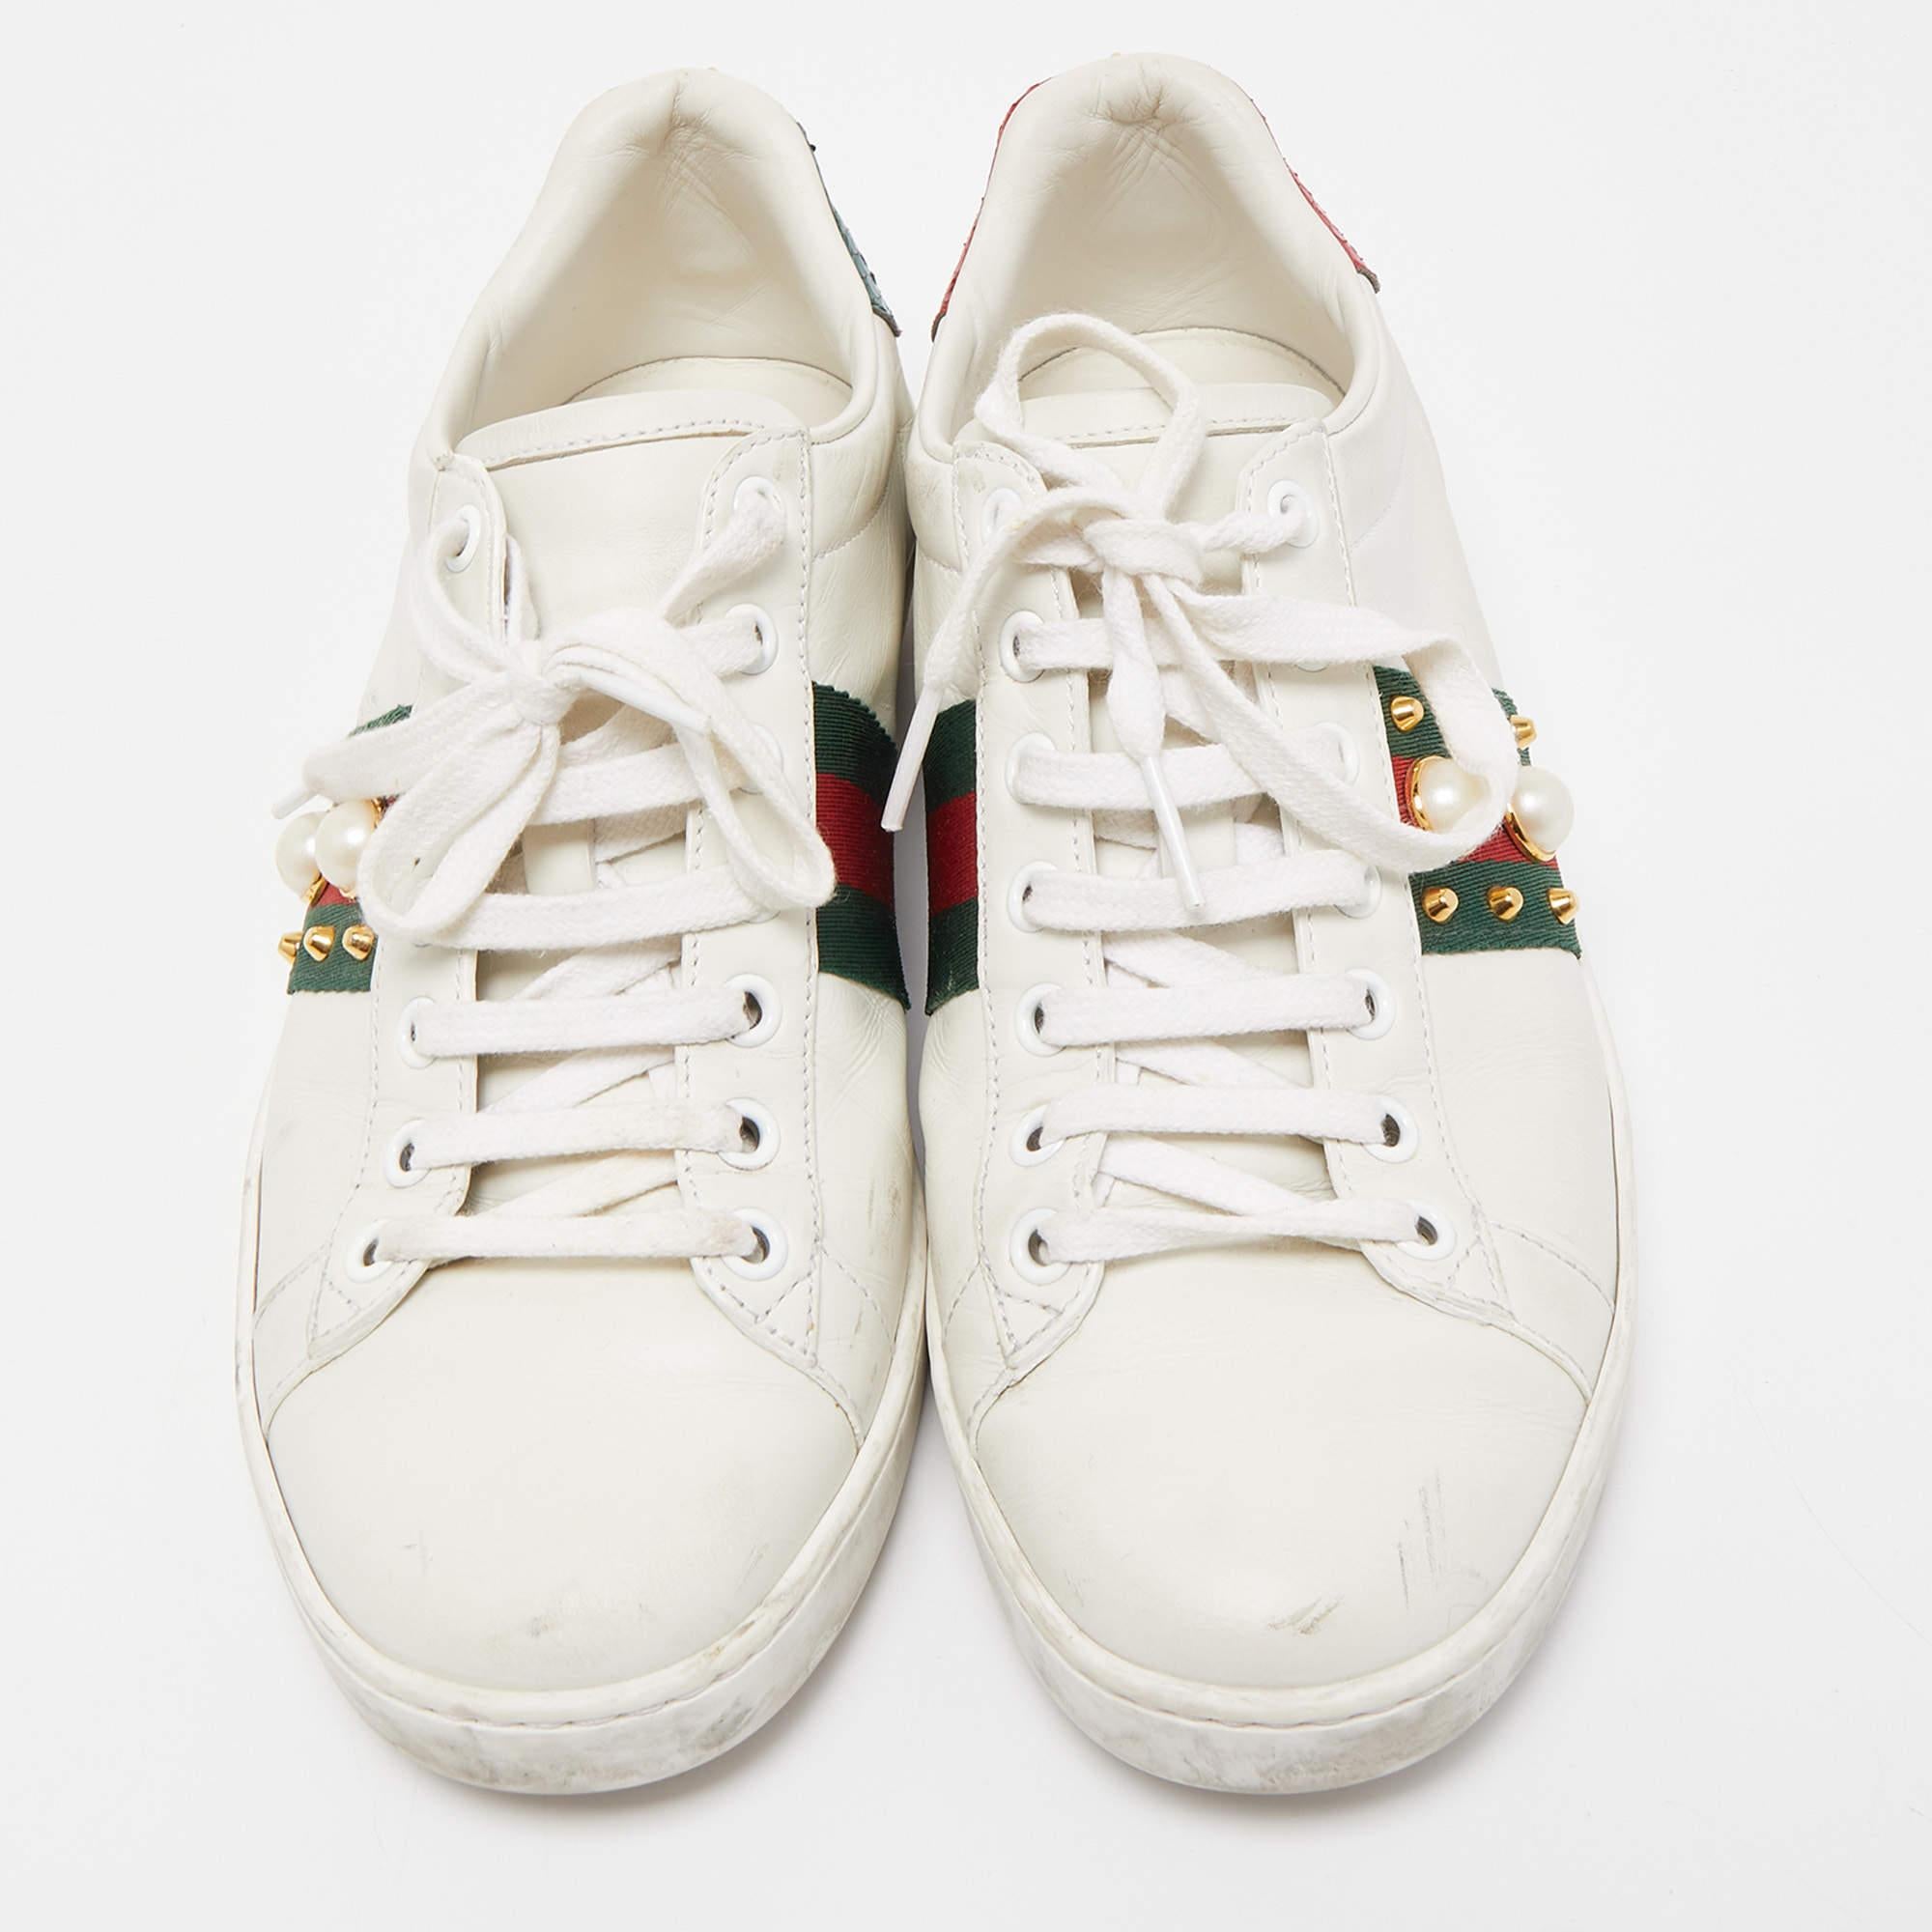 Let this comfortable pair be your first choice when you're out for a long day. These Gucci Ace sneakers have well-sewn uppers beautifully set on durable soles.

